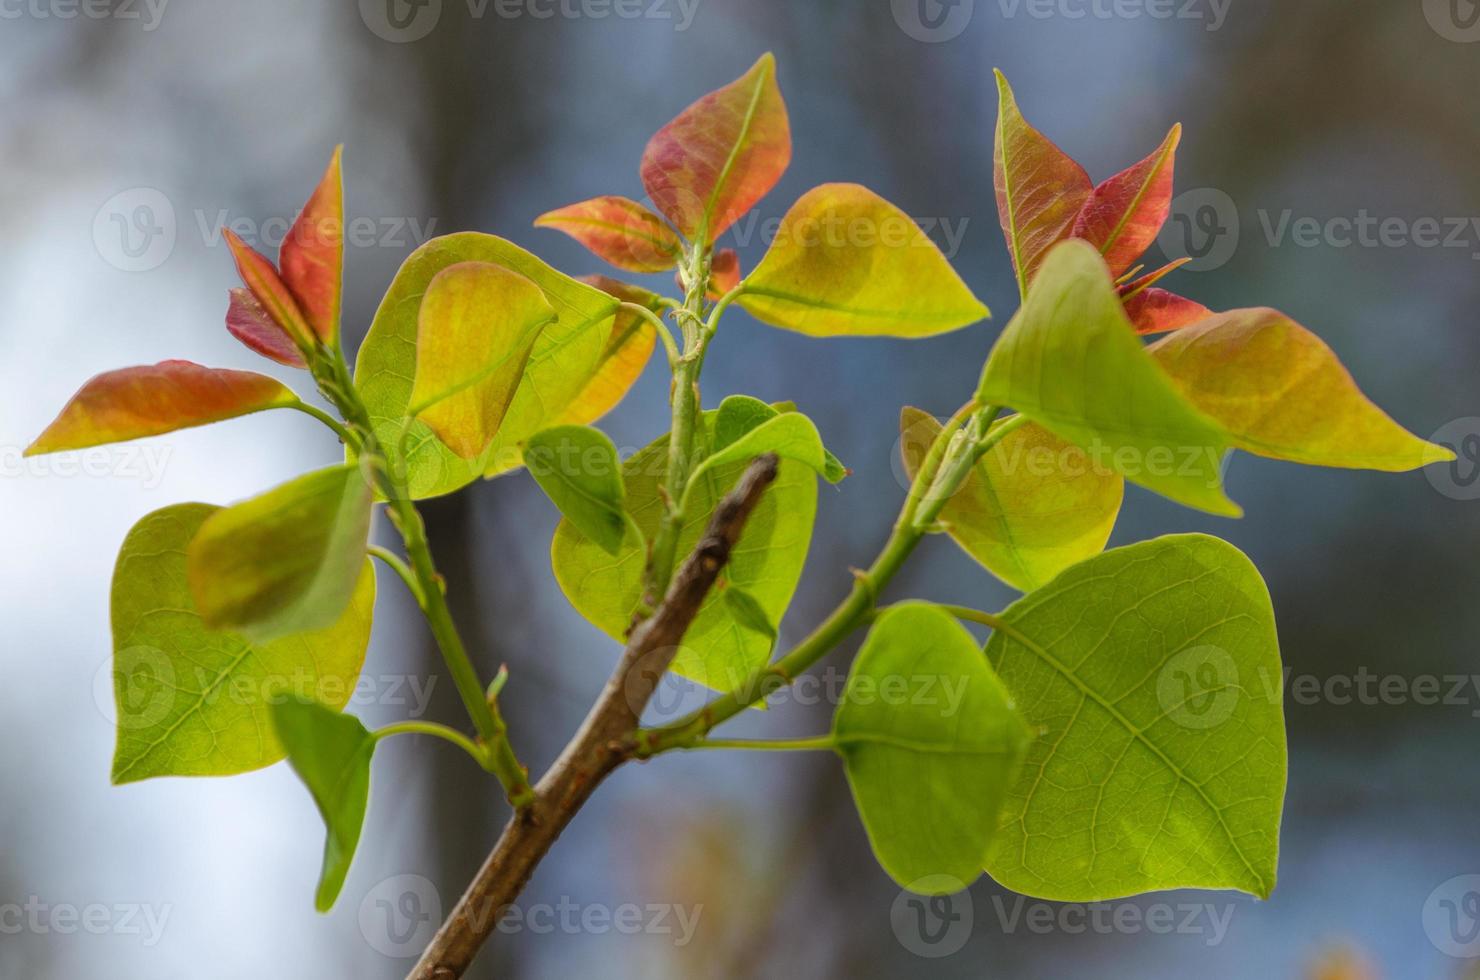 The leaves of the chinese tallow tree are red when they first appear in spring and turn red again in autumn. photo